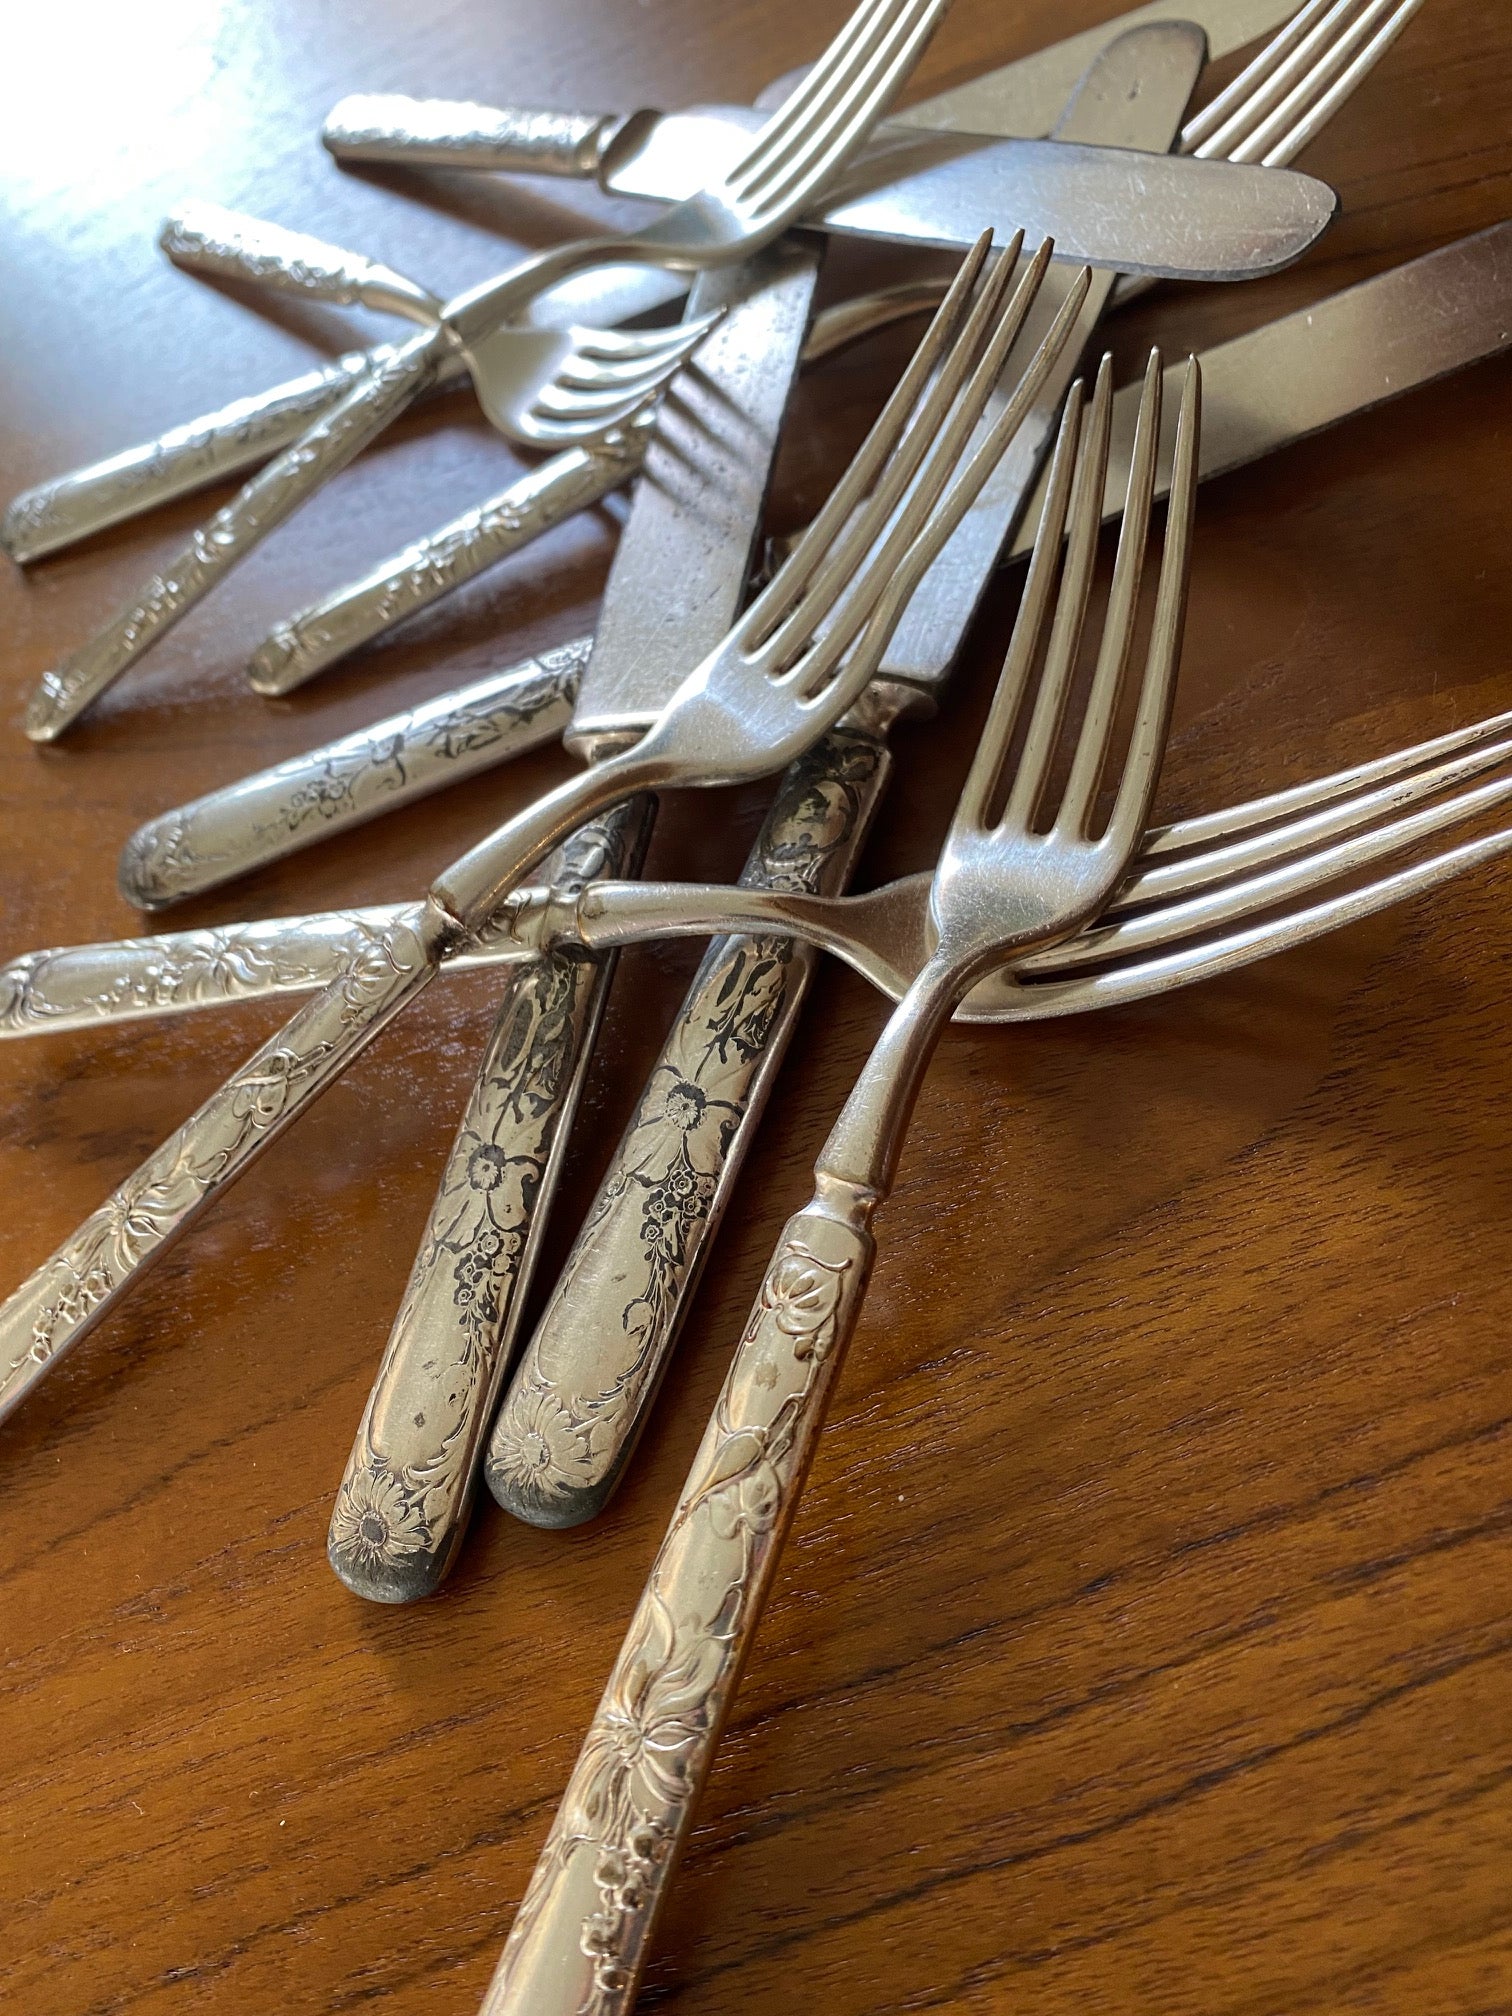 Vintage silver plate cutlery by R Wallace- Cook Street Vintage